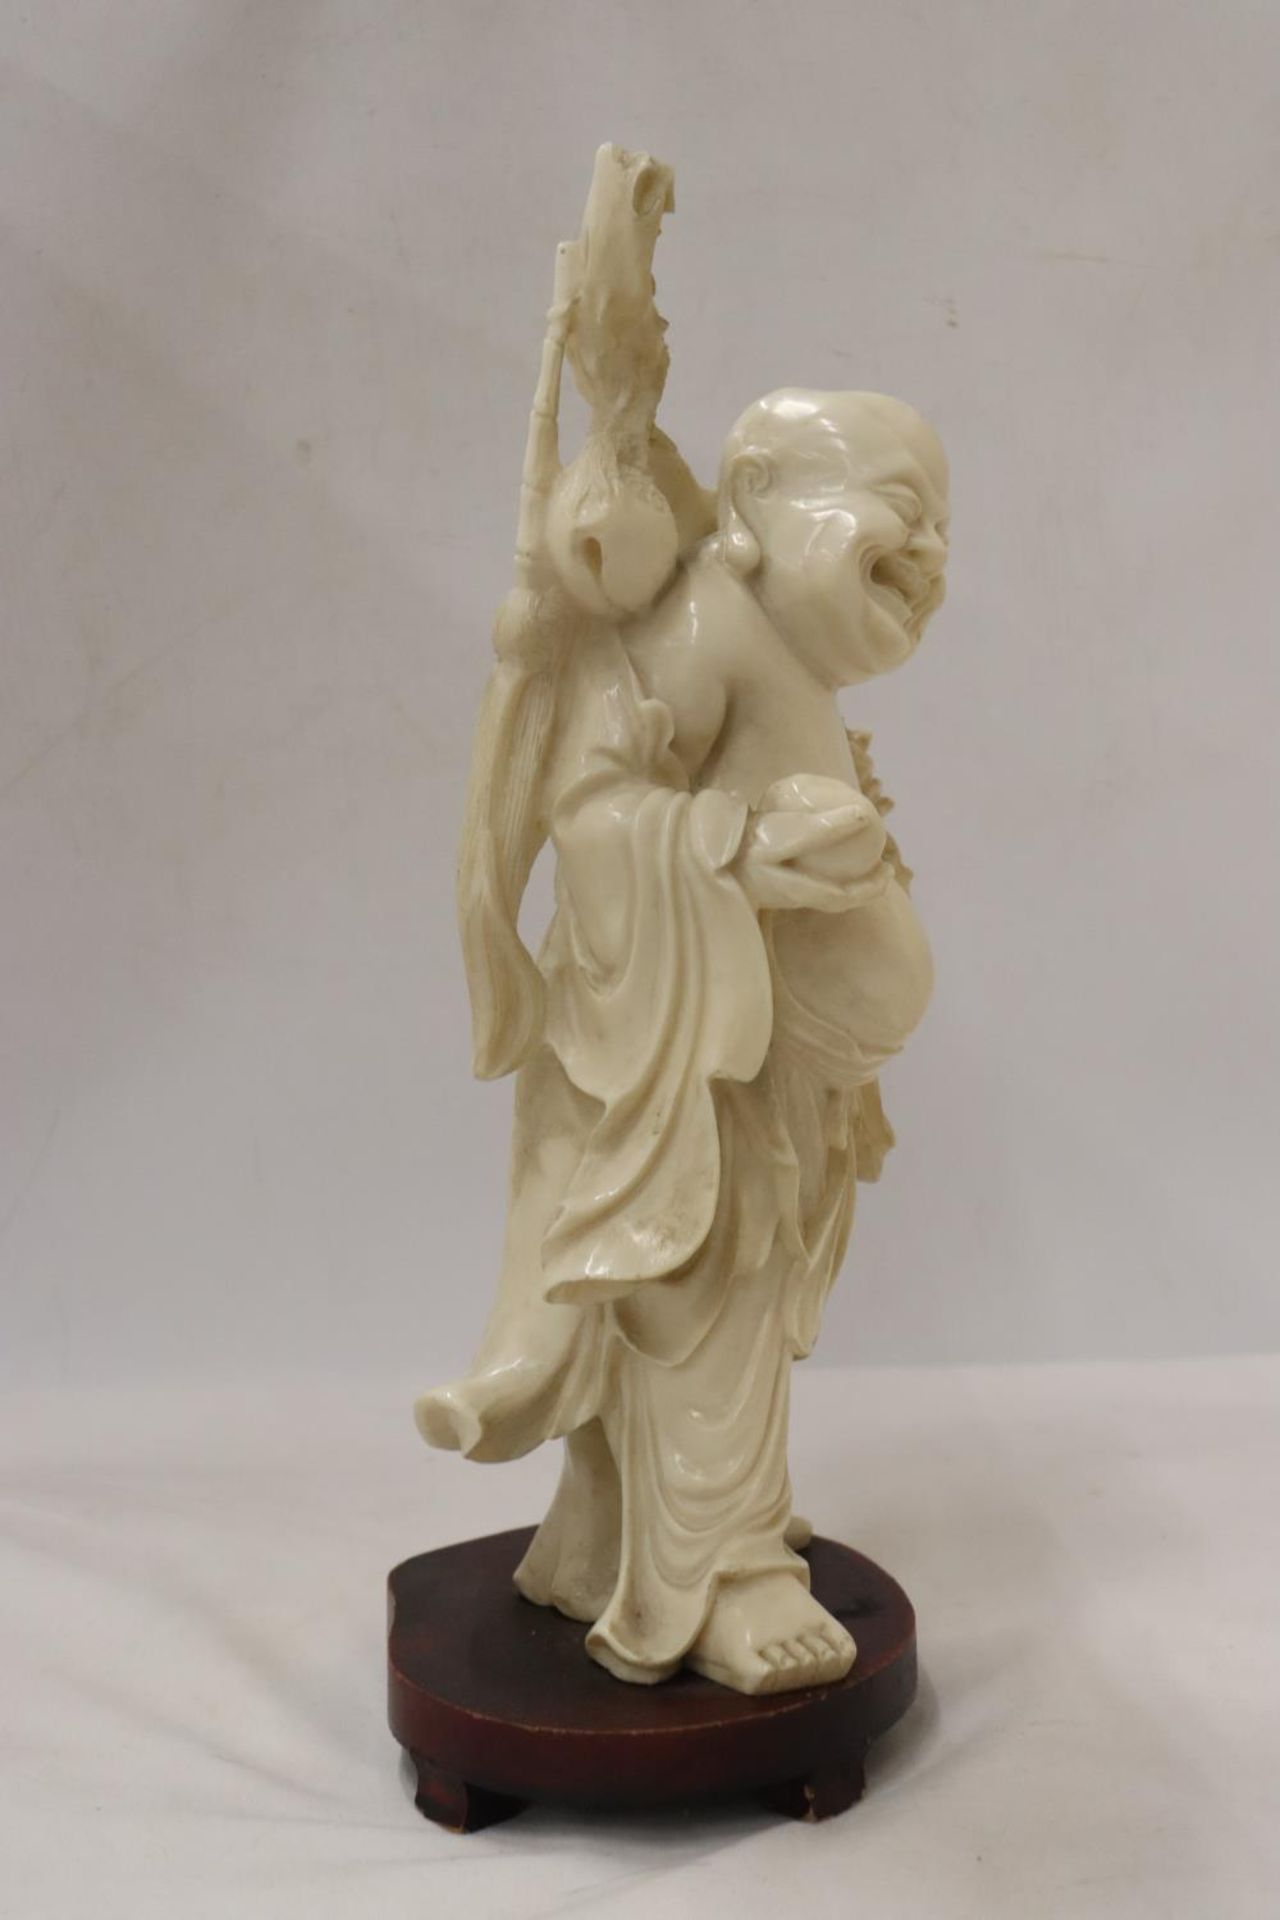 A CHINESE SCULPTURE FIGURINE ON WOODEN STAND - Image 2 of 3